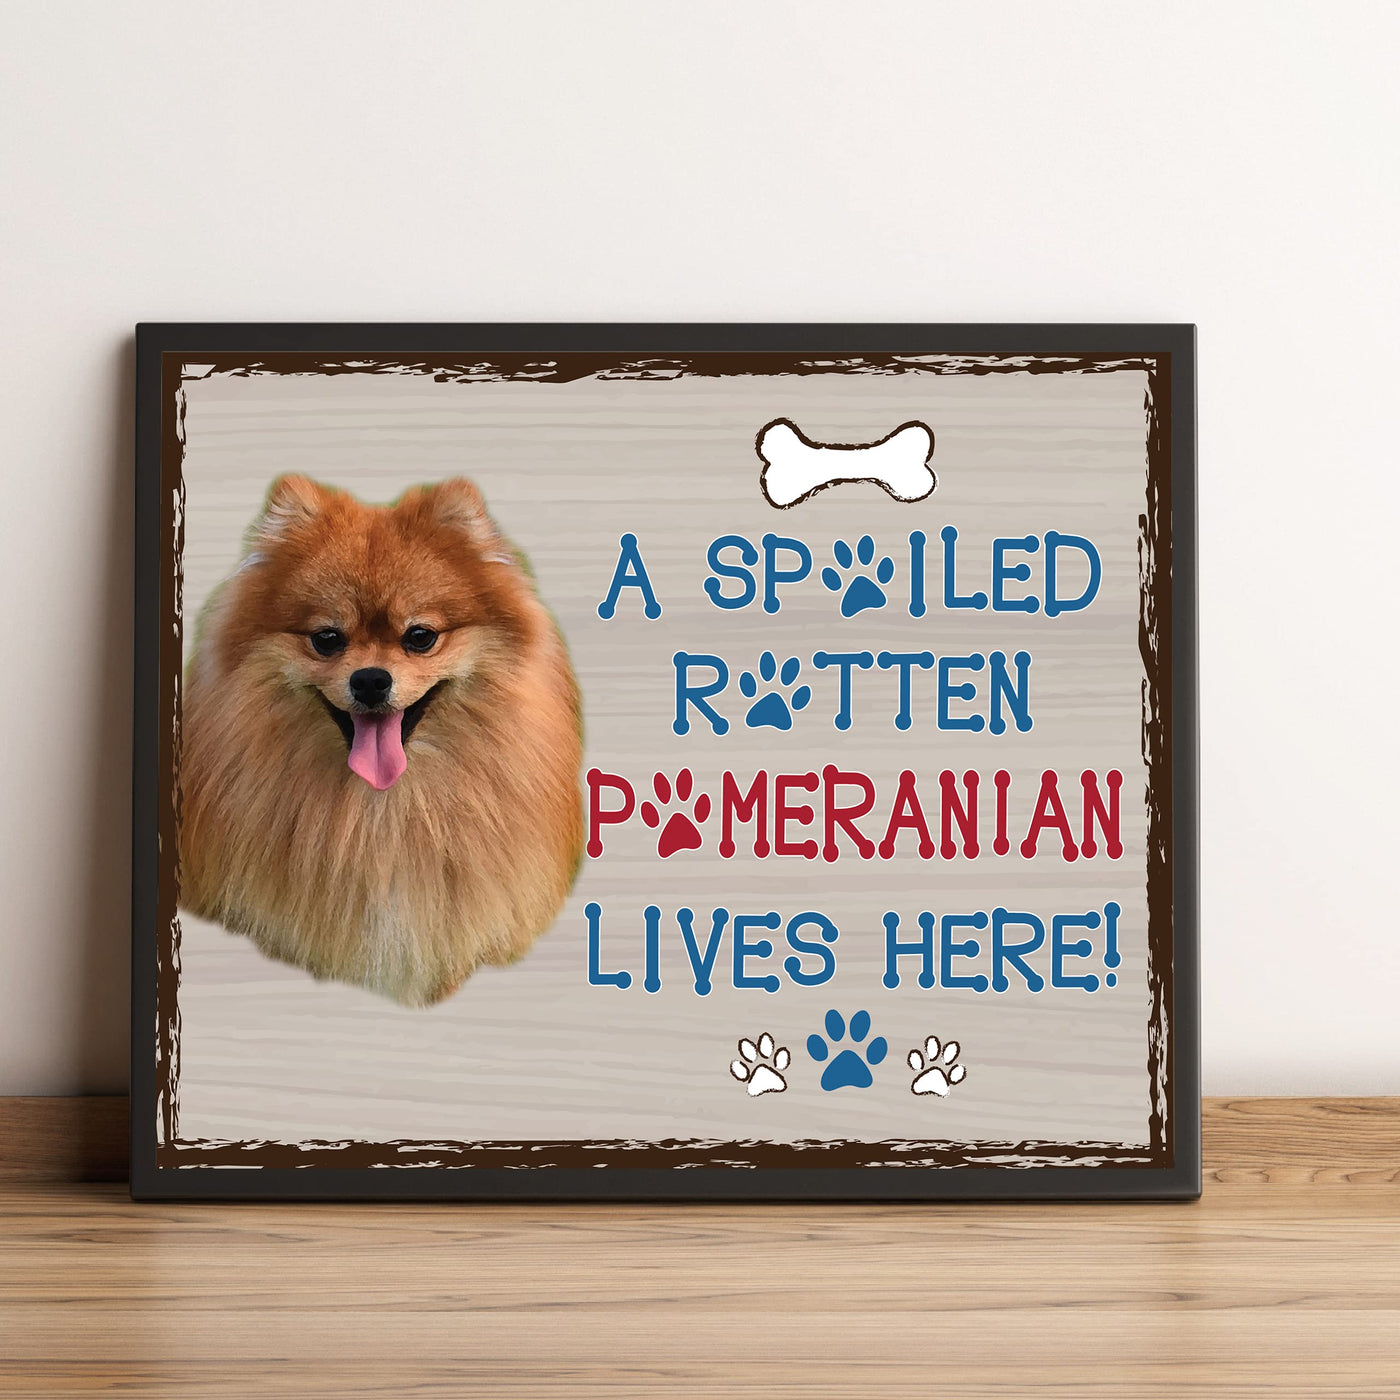 Pomeranian-Dog Poster Print-10 x 8" Wall Decor Sign-Ready To Frame."A Spoiled Rotten Pomeranian Lives Here". Perfect Pet Wall Art for Home-Kitchen-Cave-Garage. Great Gift for Pomeranian Owners!